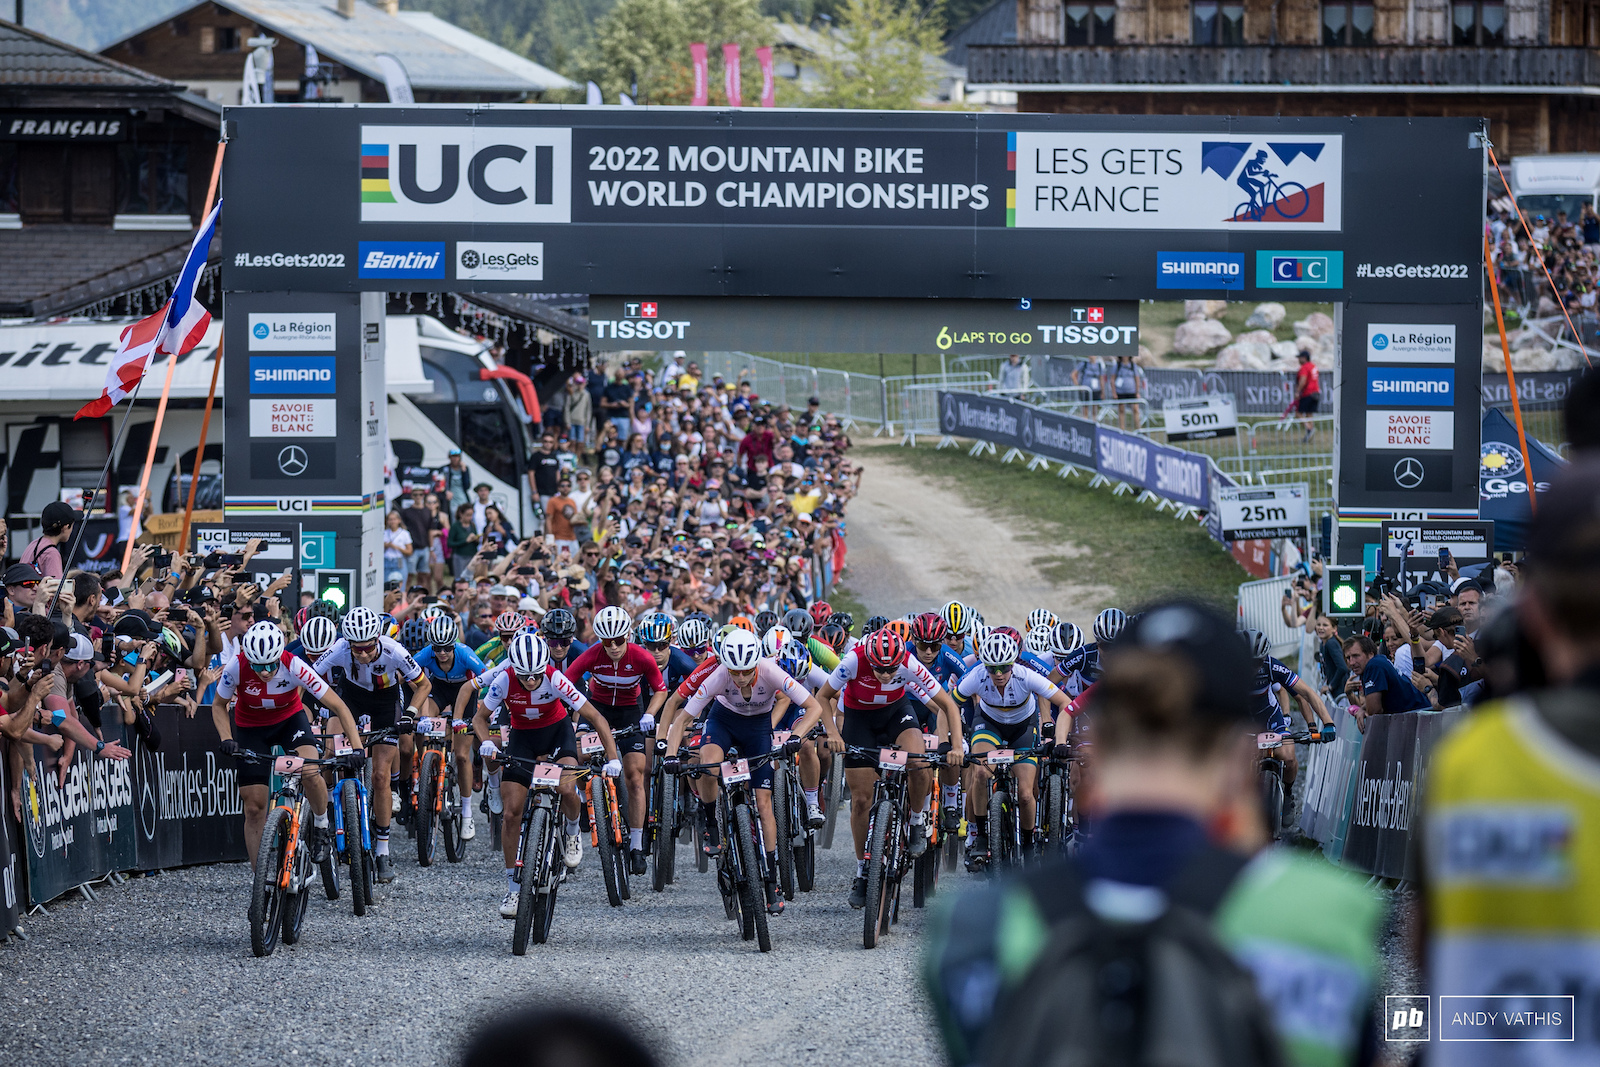 The women are off in Les Gets.